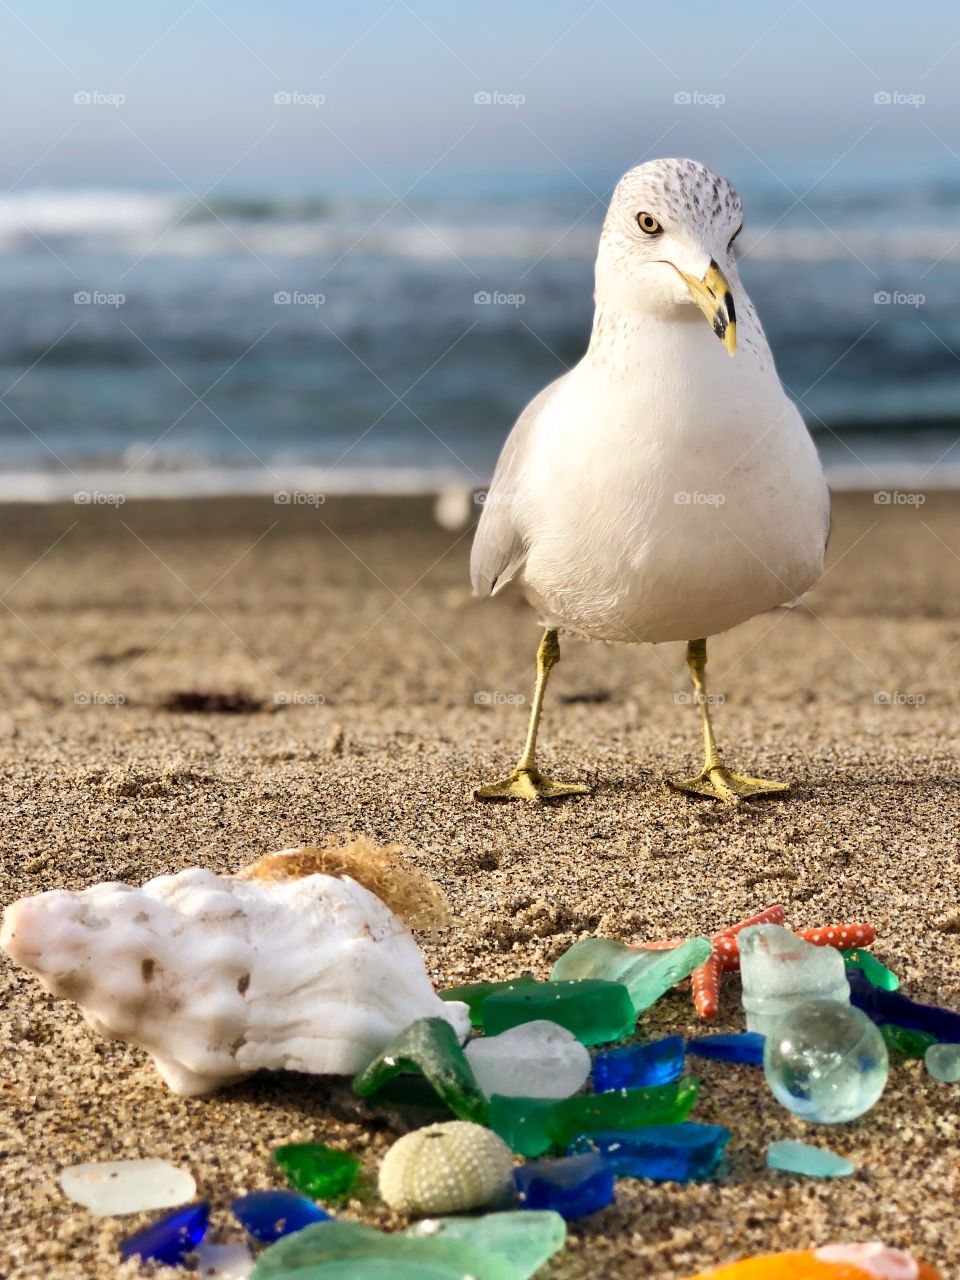 Foap Mission, The Glorious Mother Nature! Curious Seagull Looking At Shells And Sea Glass!